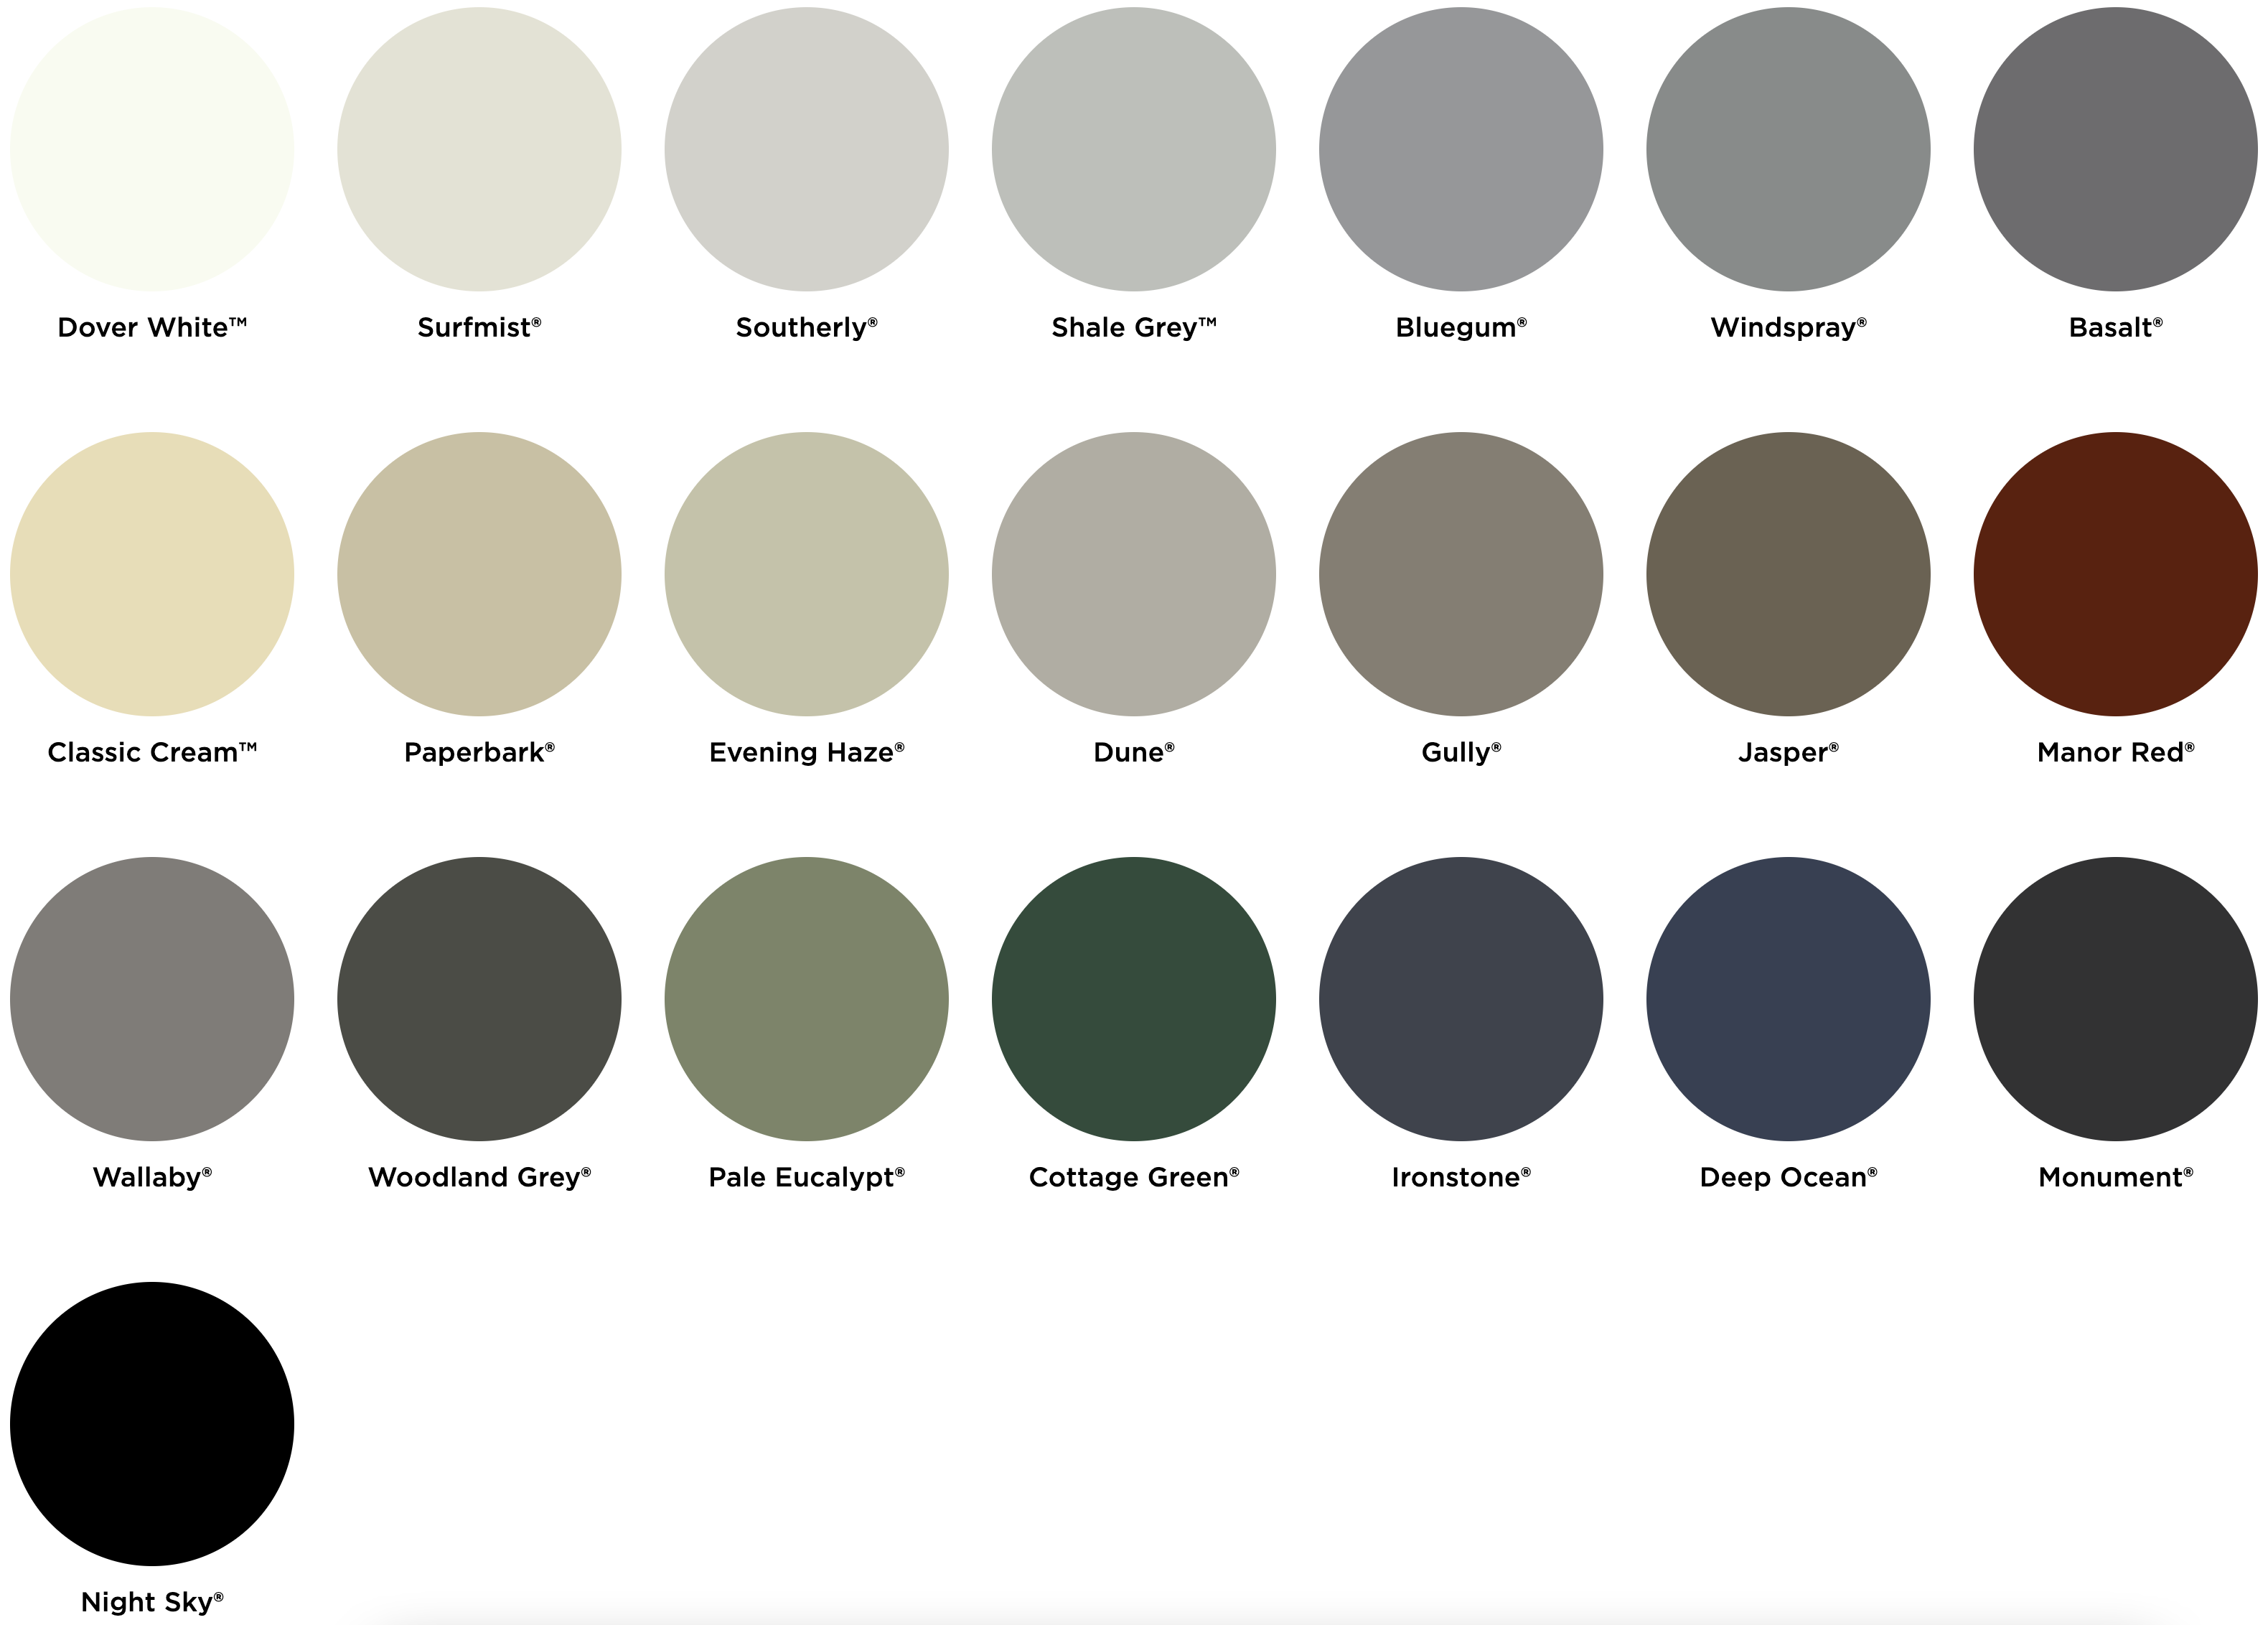 classic colorbond range image source from colorbond website